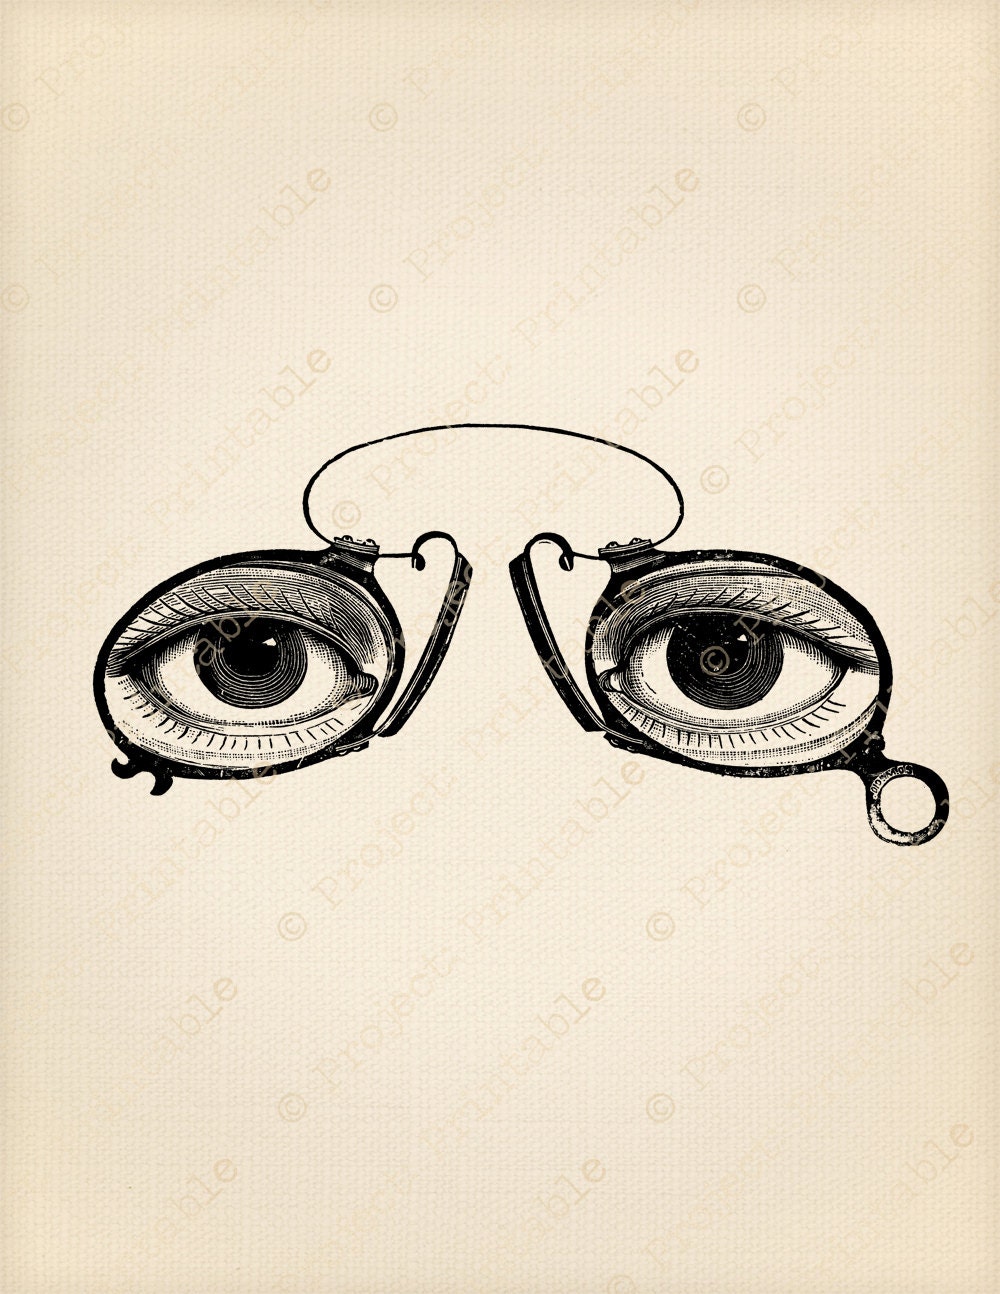 Instant Download Printable - Vintage Eyes Glasses Spectacles - Steampunk Graphics Clip Art - Digital Fabric Transfer Image - iron on clipart